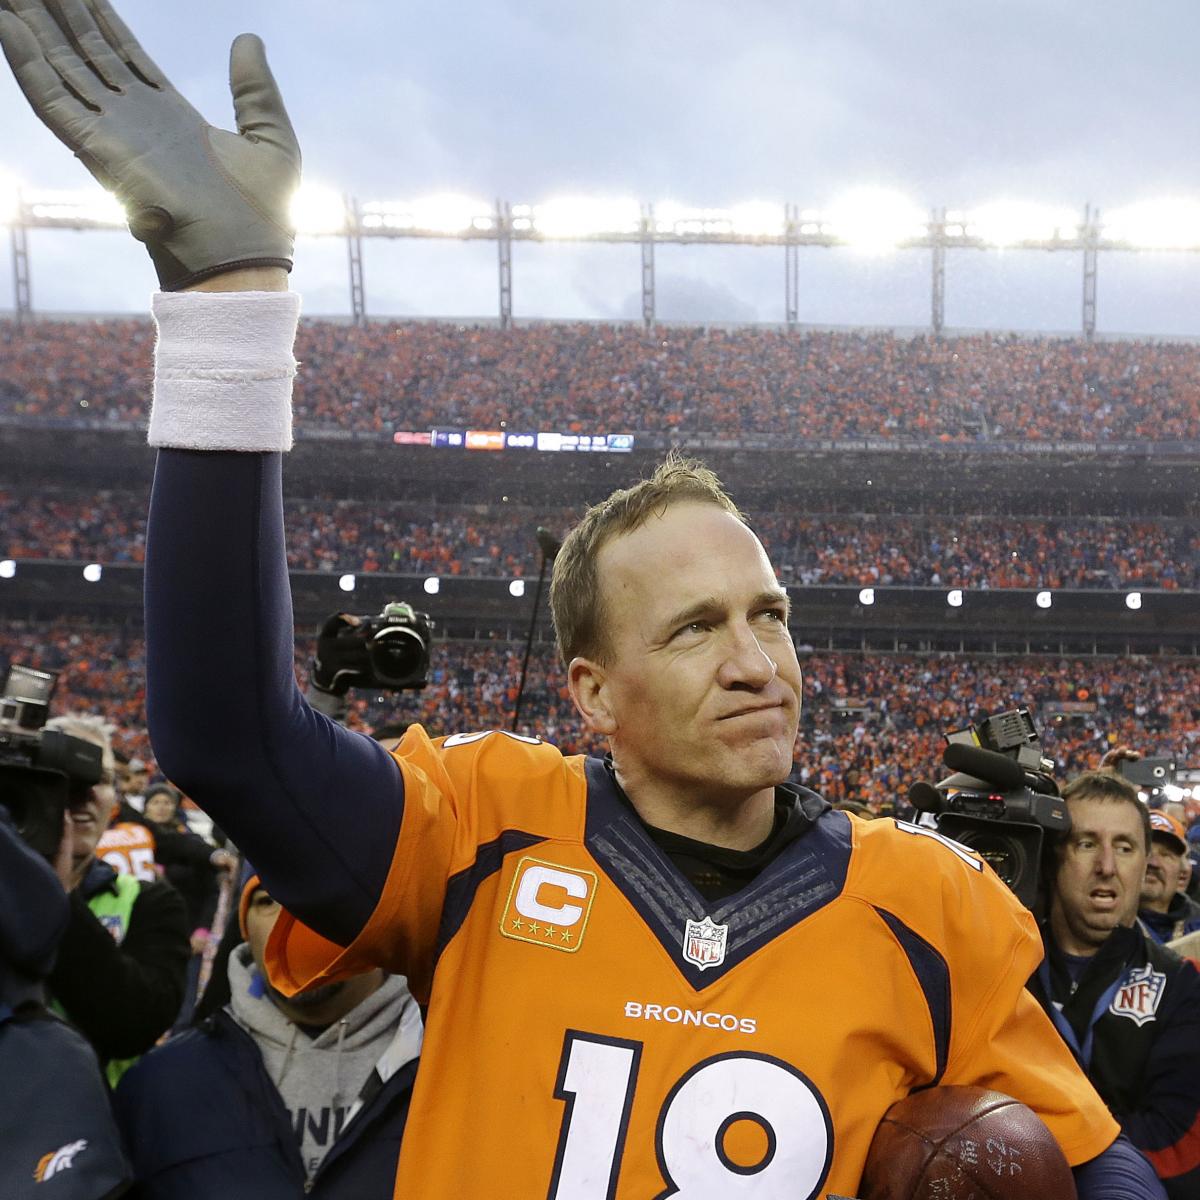 Peyton Manning Becomes 5th QB to Throw 1,000 Yards in Super Bowl History